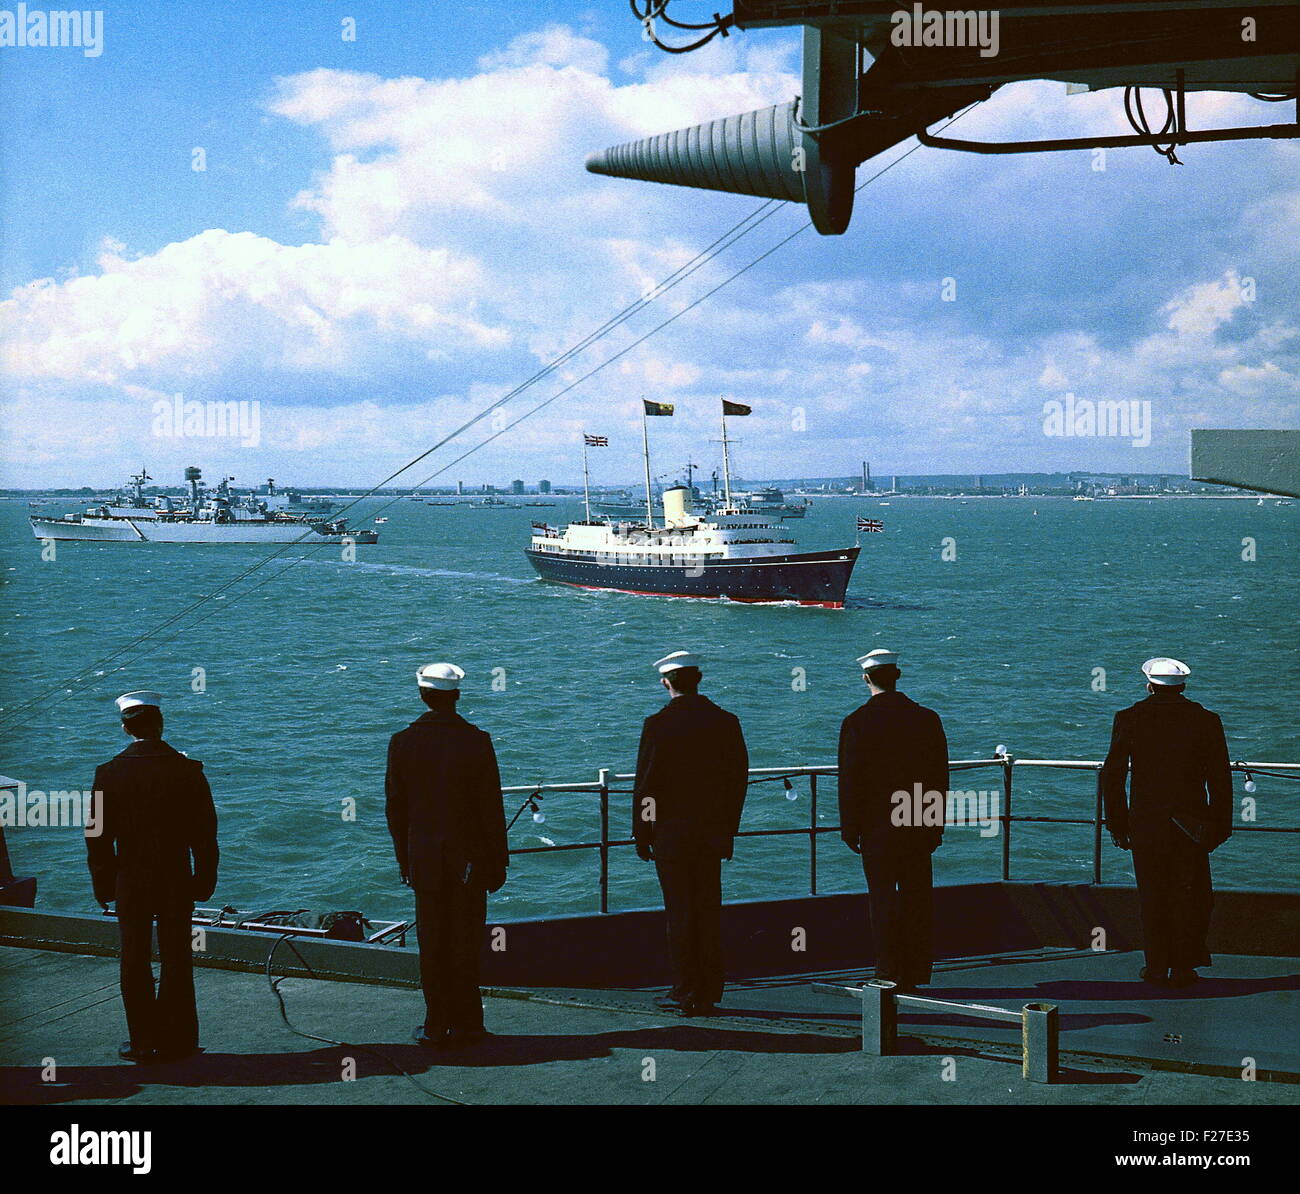 AJAXNETPHOTO - (PMO) 16 MAY 1969. SPITHEAD, ENGLAND. - ROYAL INSPECTION - THE ROYAL YACHT BRITANNIA CARRYING QUEEN ELIZABETH II, THE DUKE OF EDINBURGH AND PRINCESS ANNE, PICTURED OFF SPITHEAD FROM THE DECK OF THE USS WASP, DURING THE ROYAL REVIEW OF 61 WARSHIPS OF TWELVE N.A.T.O. (NORTH ATLANTIC TREATY ORGANISATION) COUNTRIES.  PHOTO:JONATHAN EASTLAND/AJAX REF:C6919 10C Stock Photo